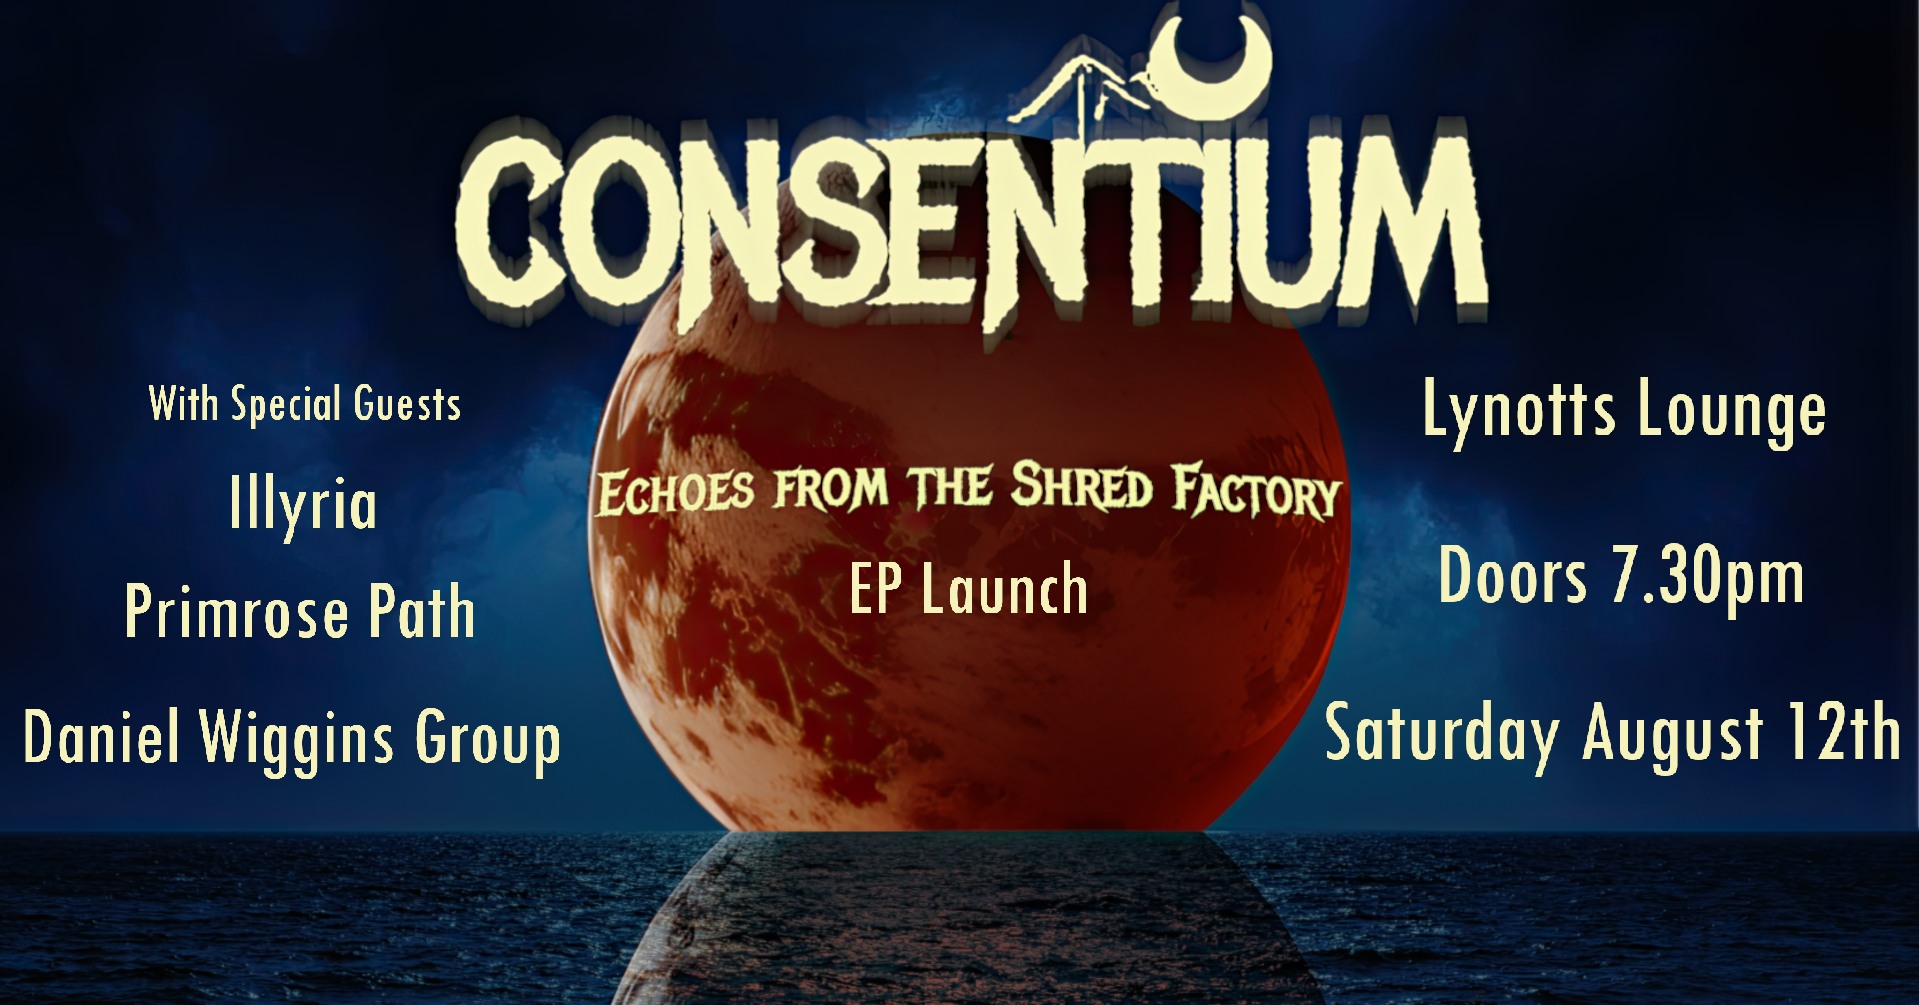 Consentium - Echoes from the Shred Factory EP Launch